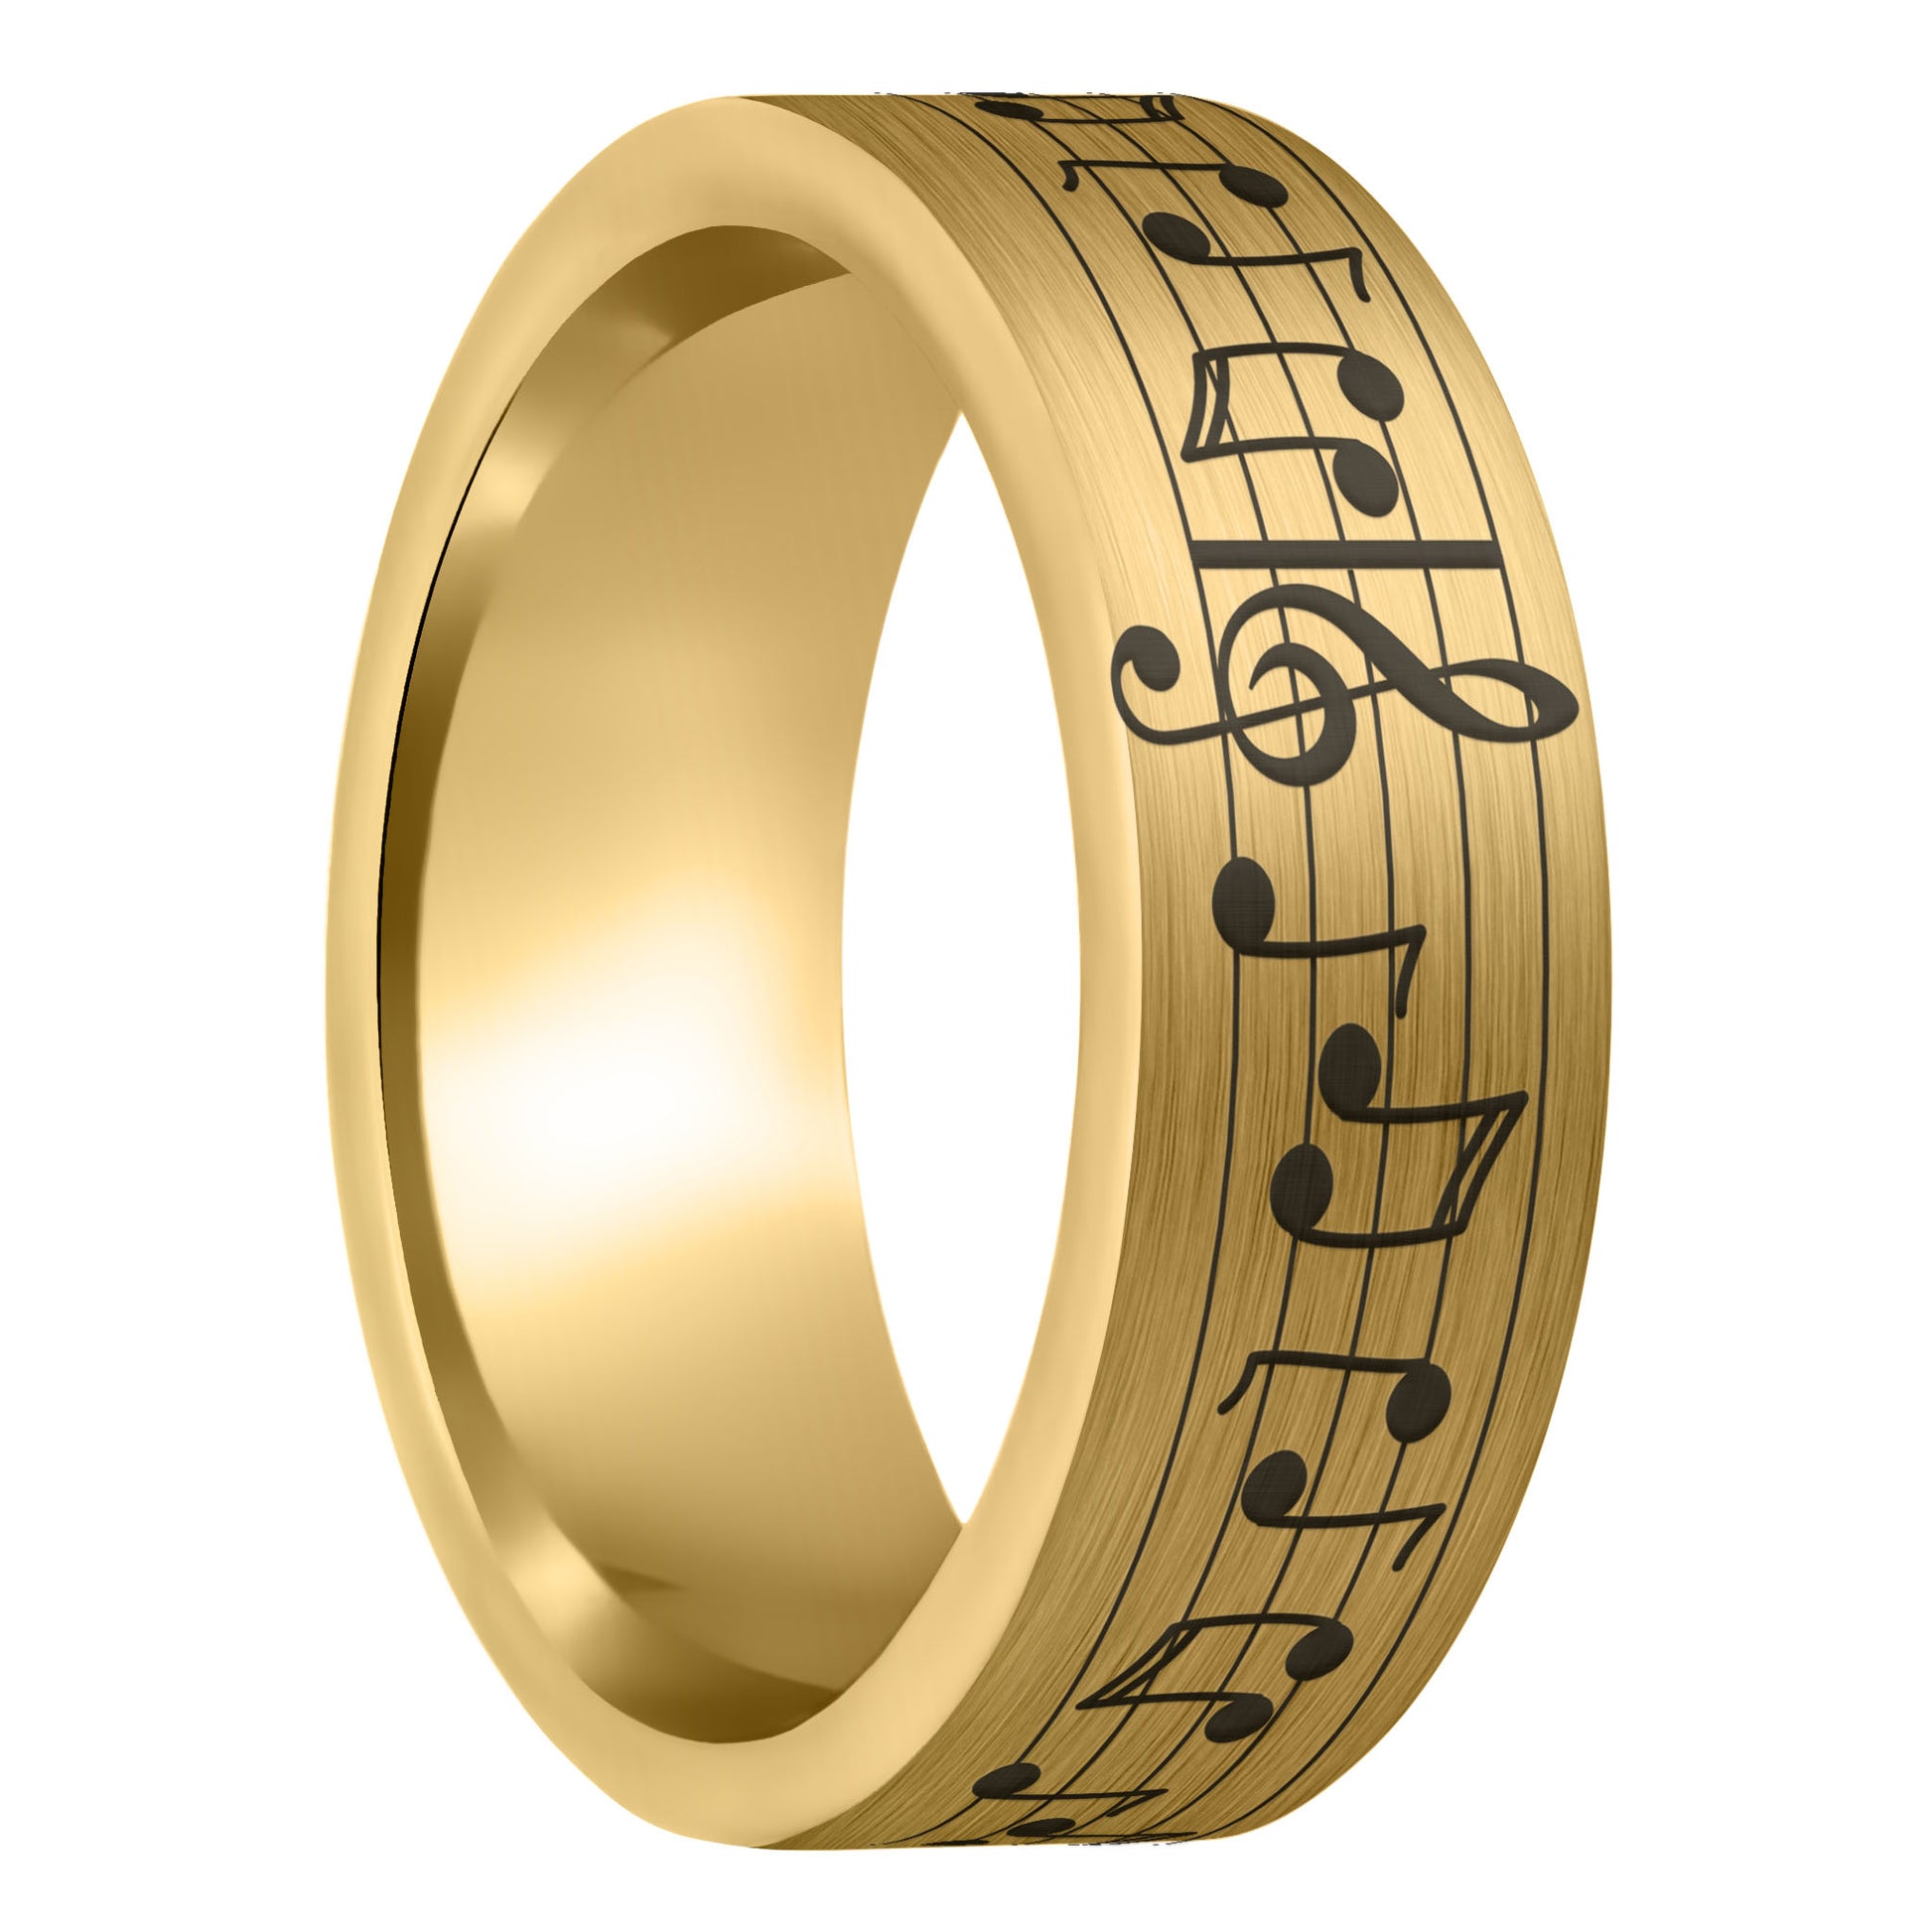 A music notes brushed gold tungsten men's wedding band displayed on a plain white background.